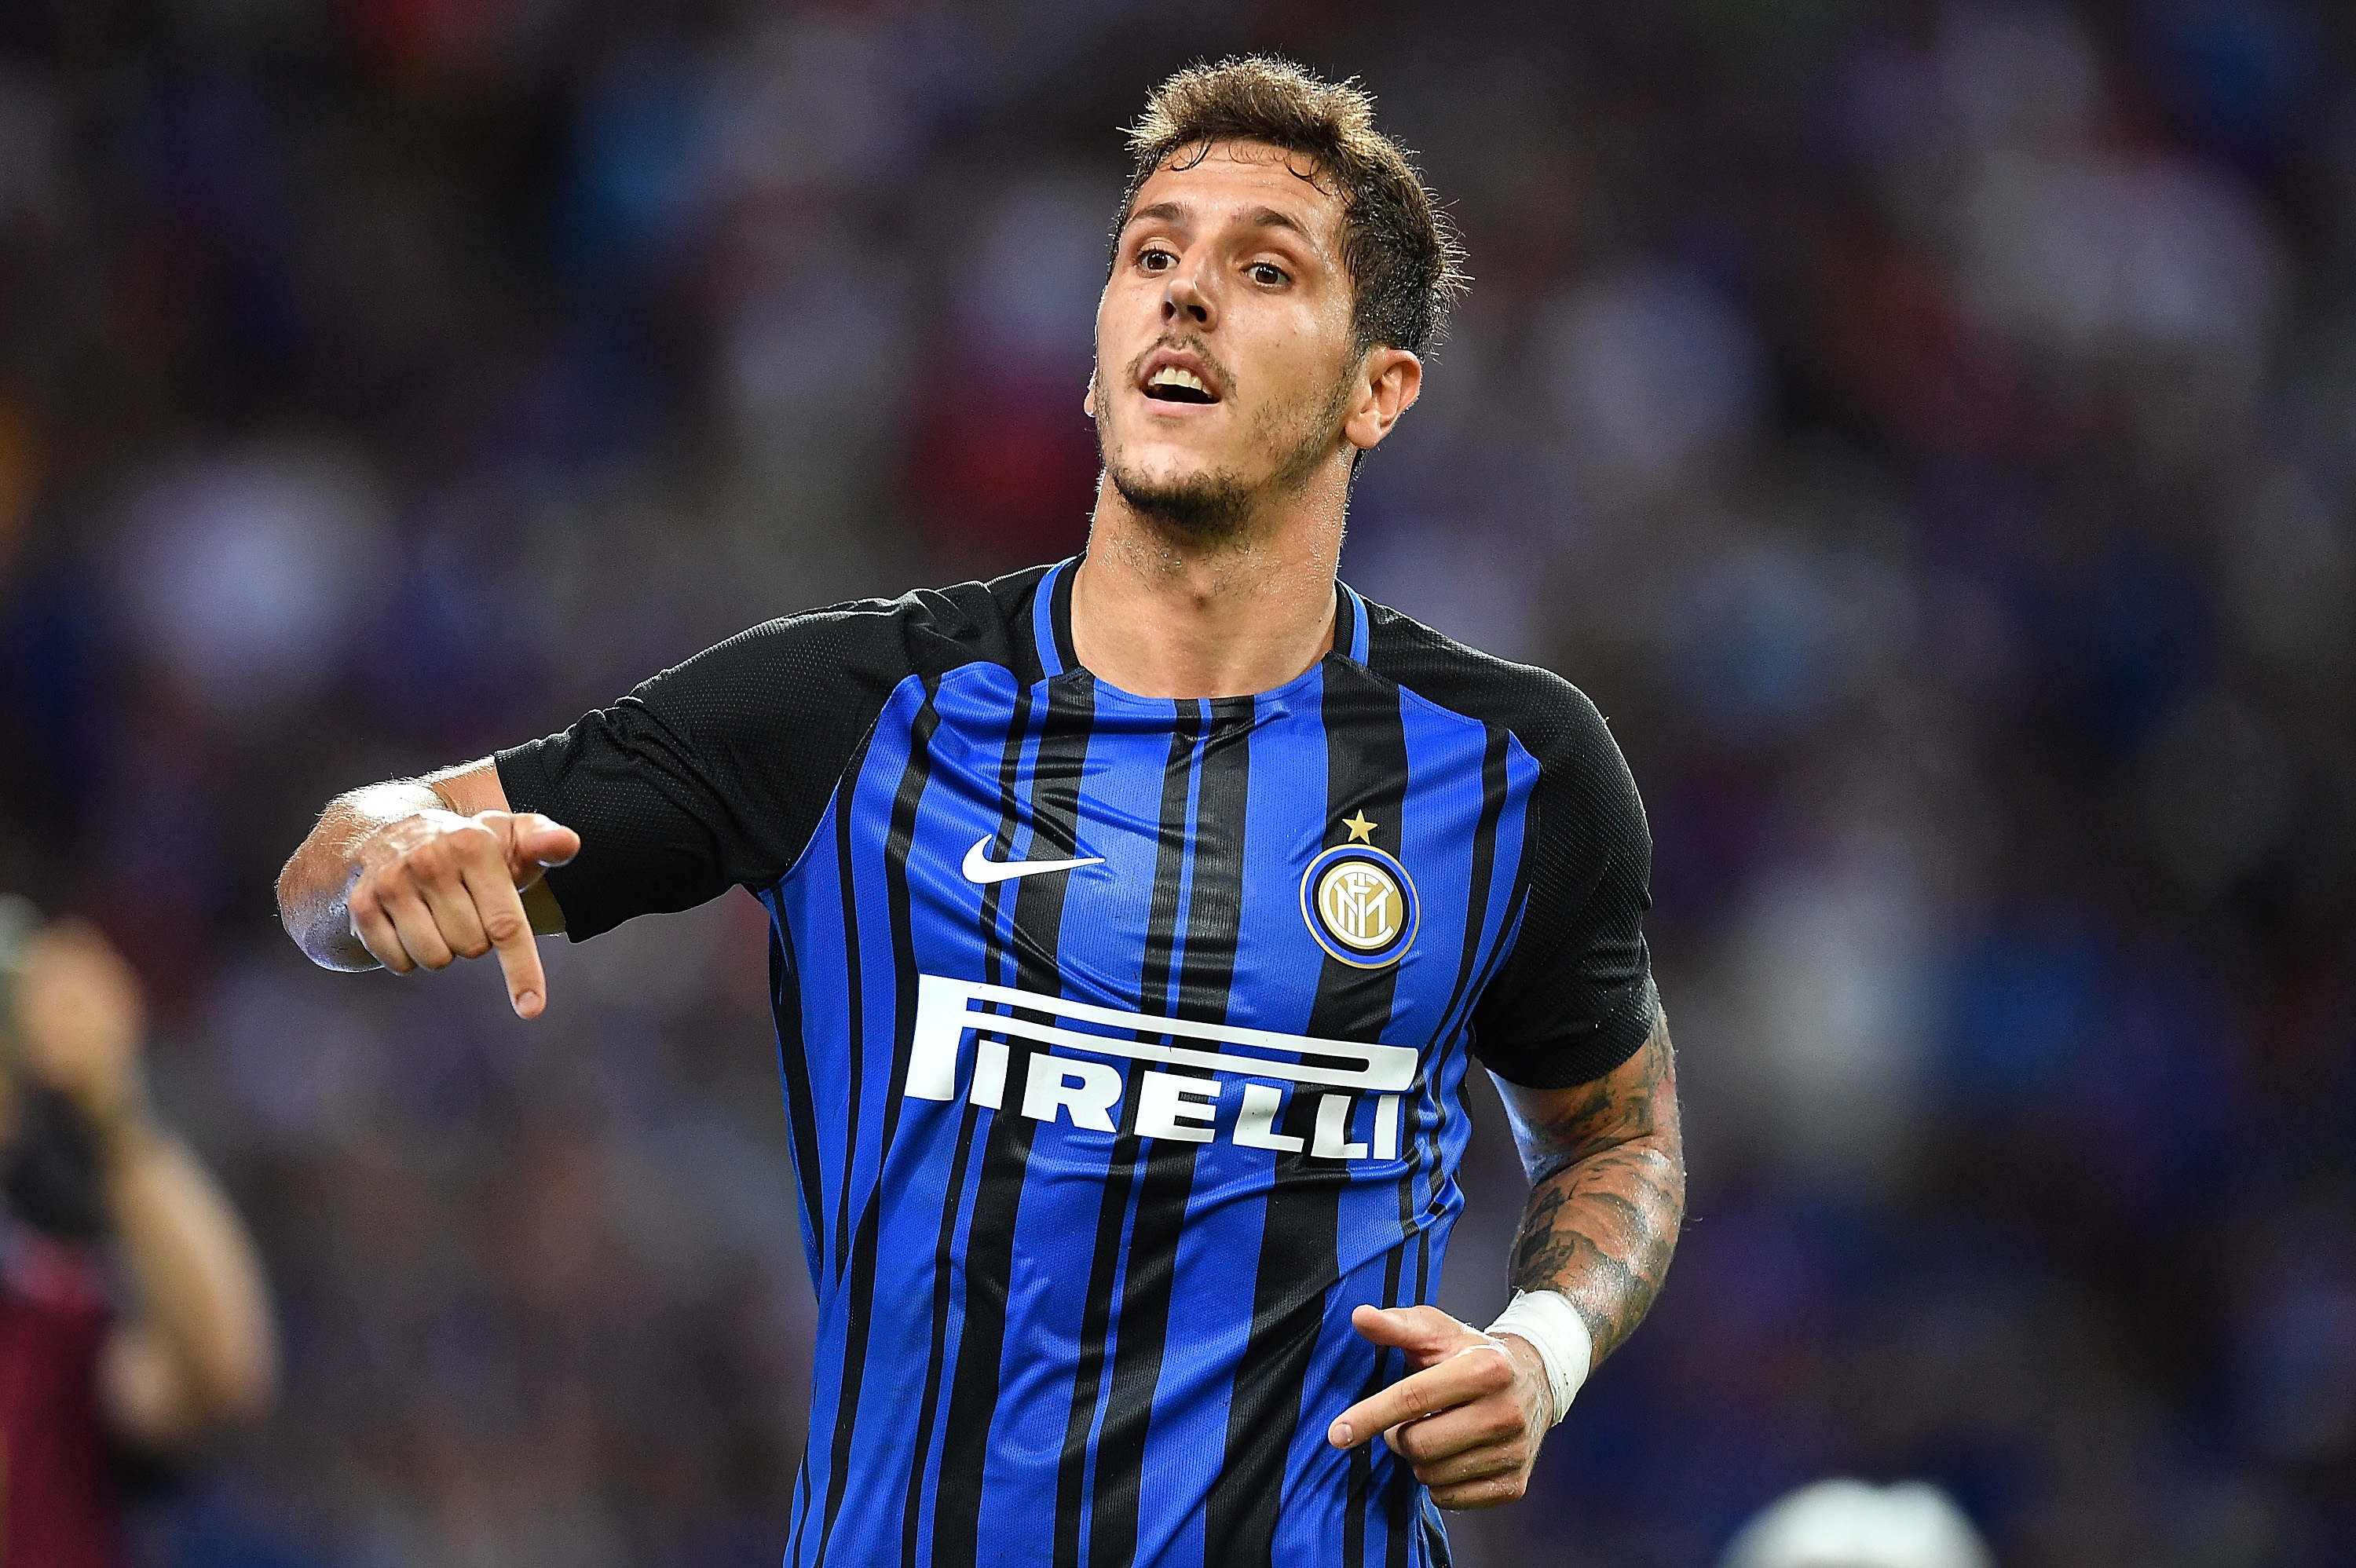 From Spain – Sevilla will move for Jovetic if they qualify for UCL